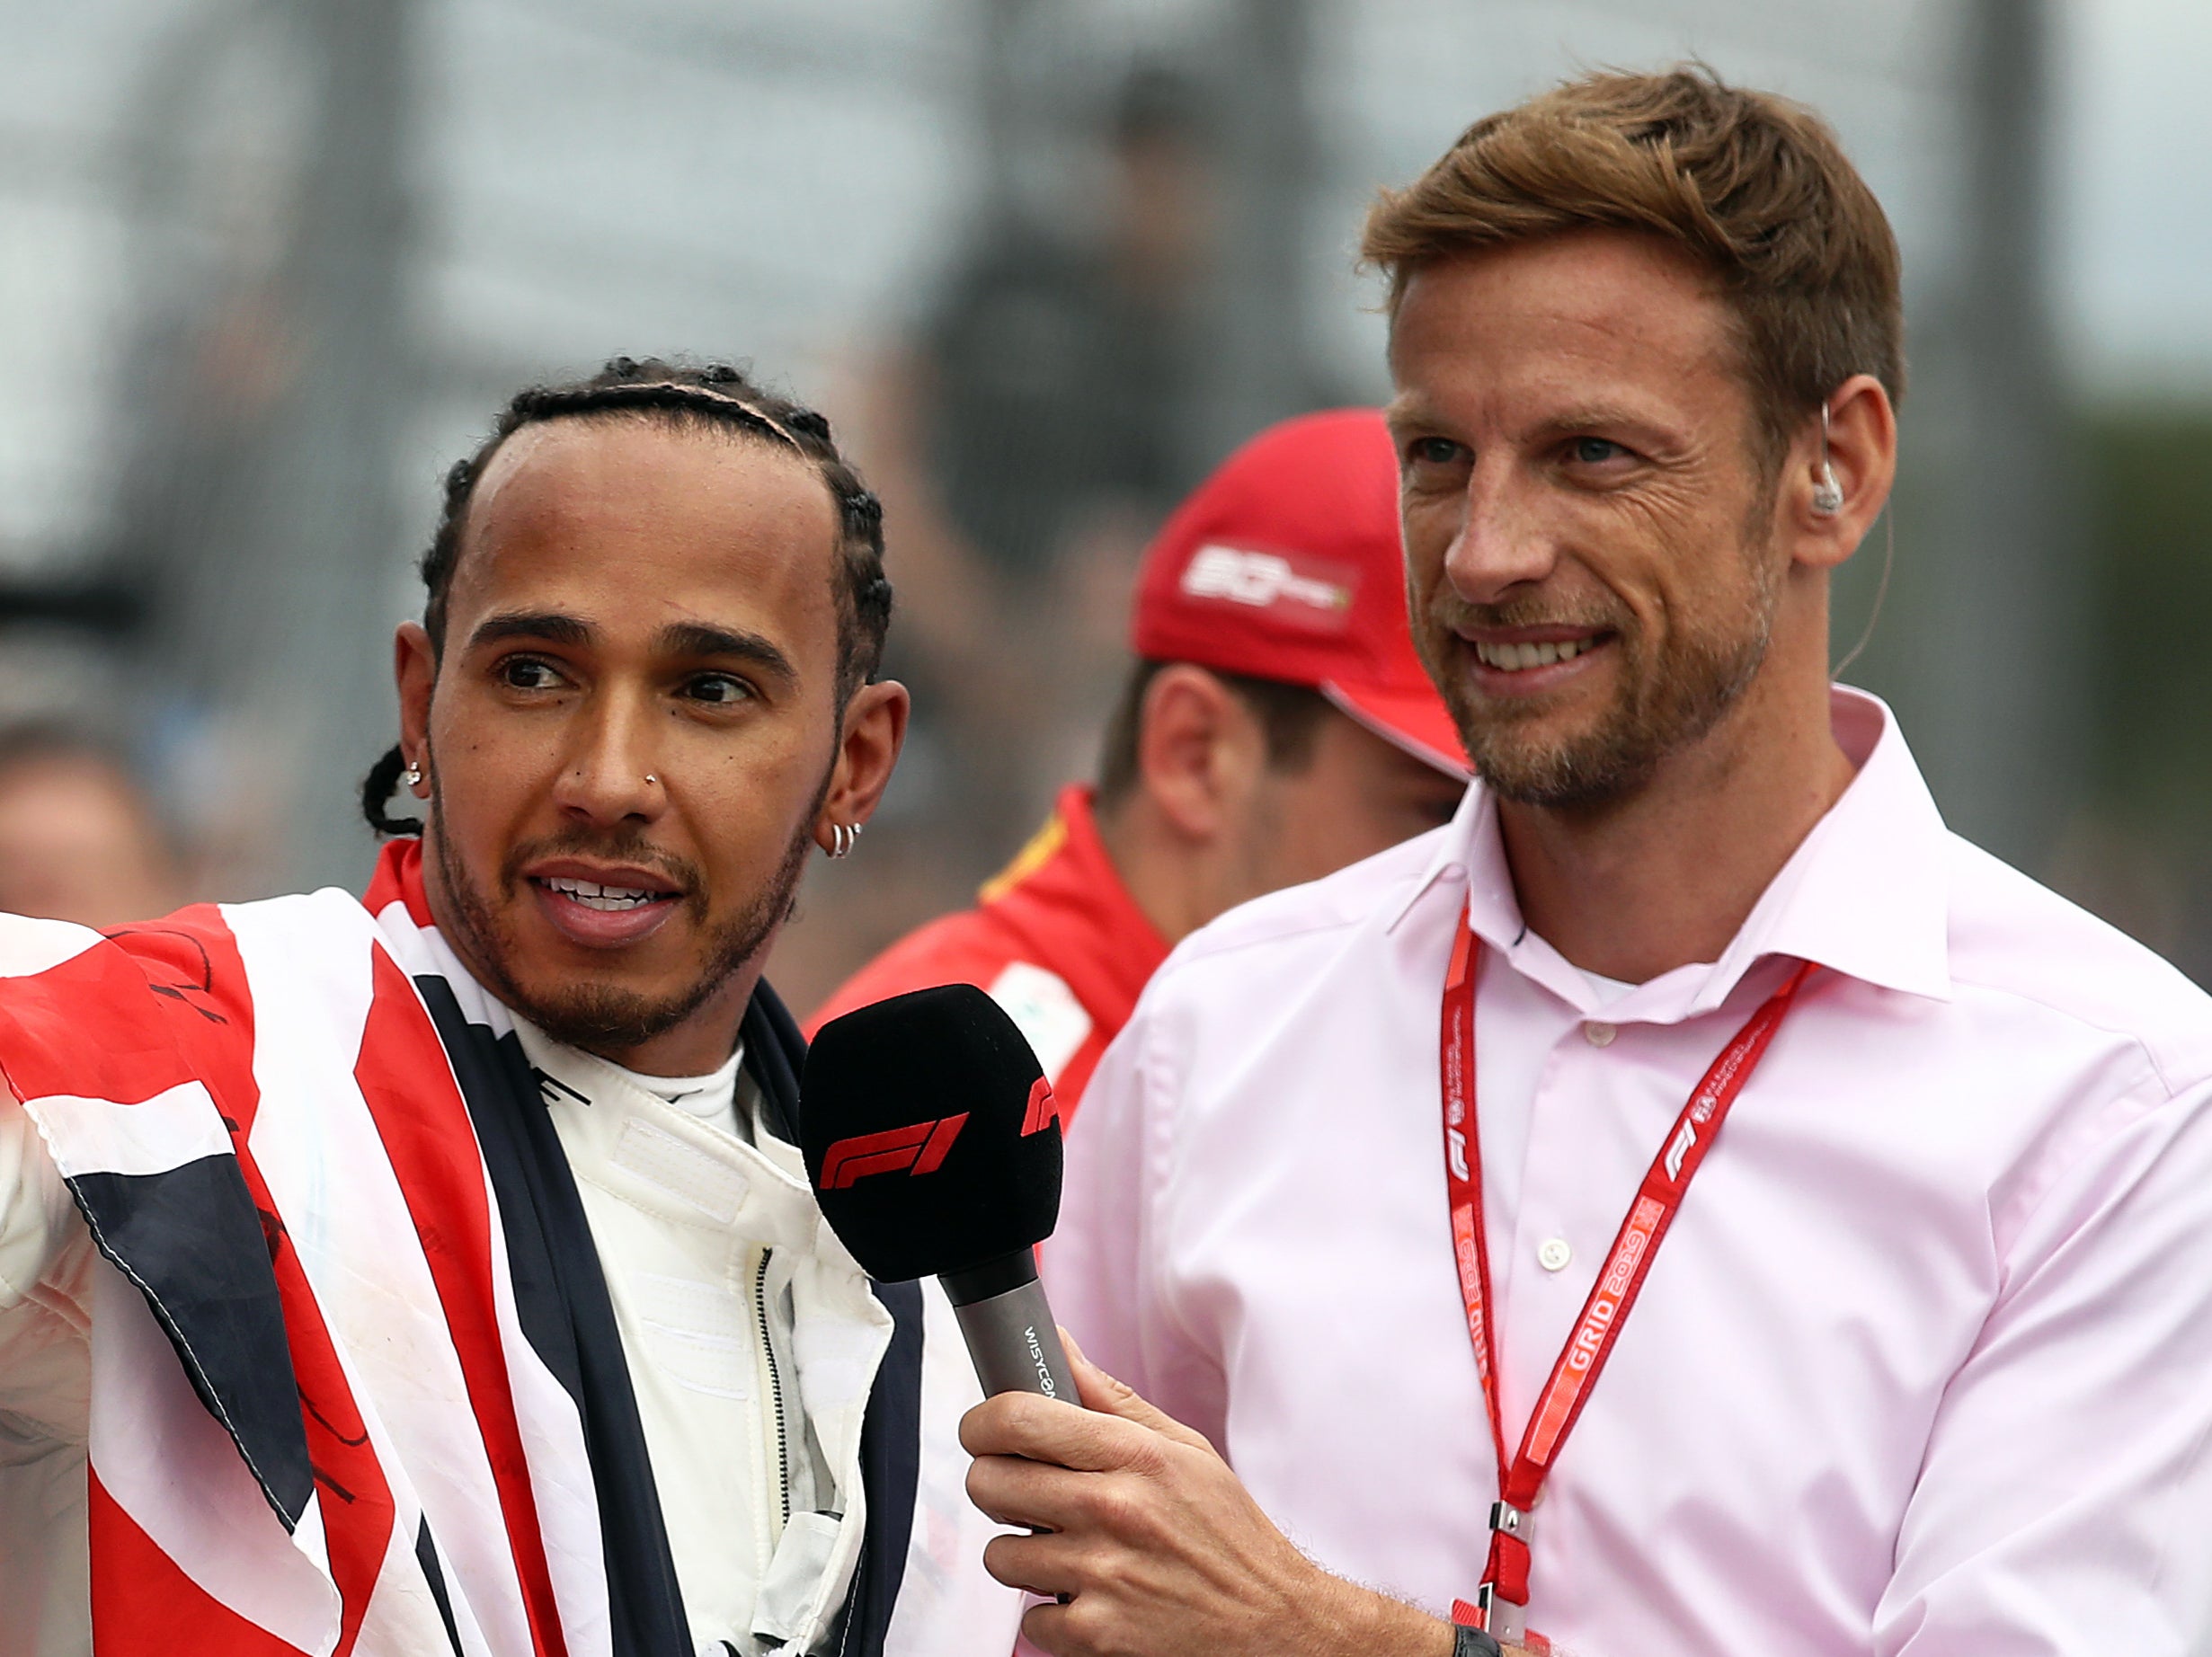 Lewis Hamilton and Jenson Button in parc ferme at Silverstone